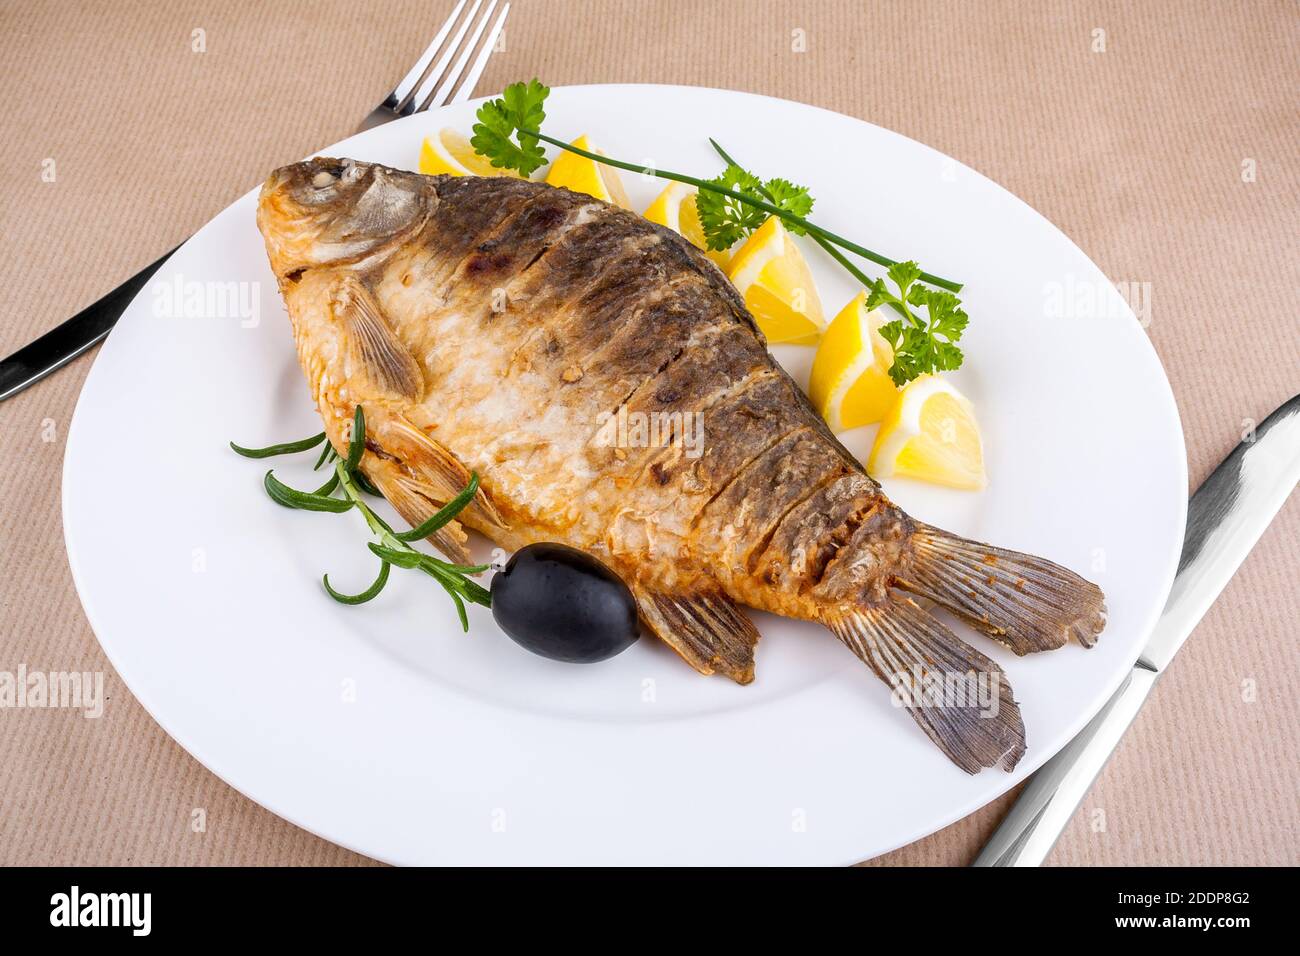 Fried fish on white plate with fork and knife, closeup Stock Photo